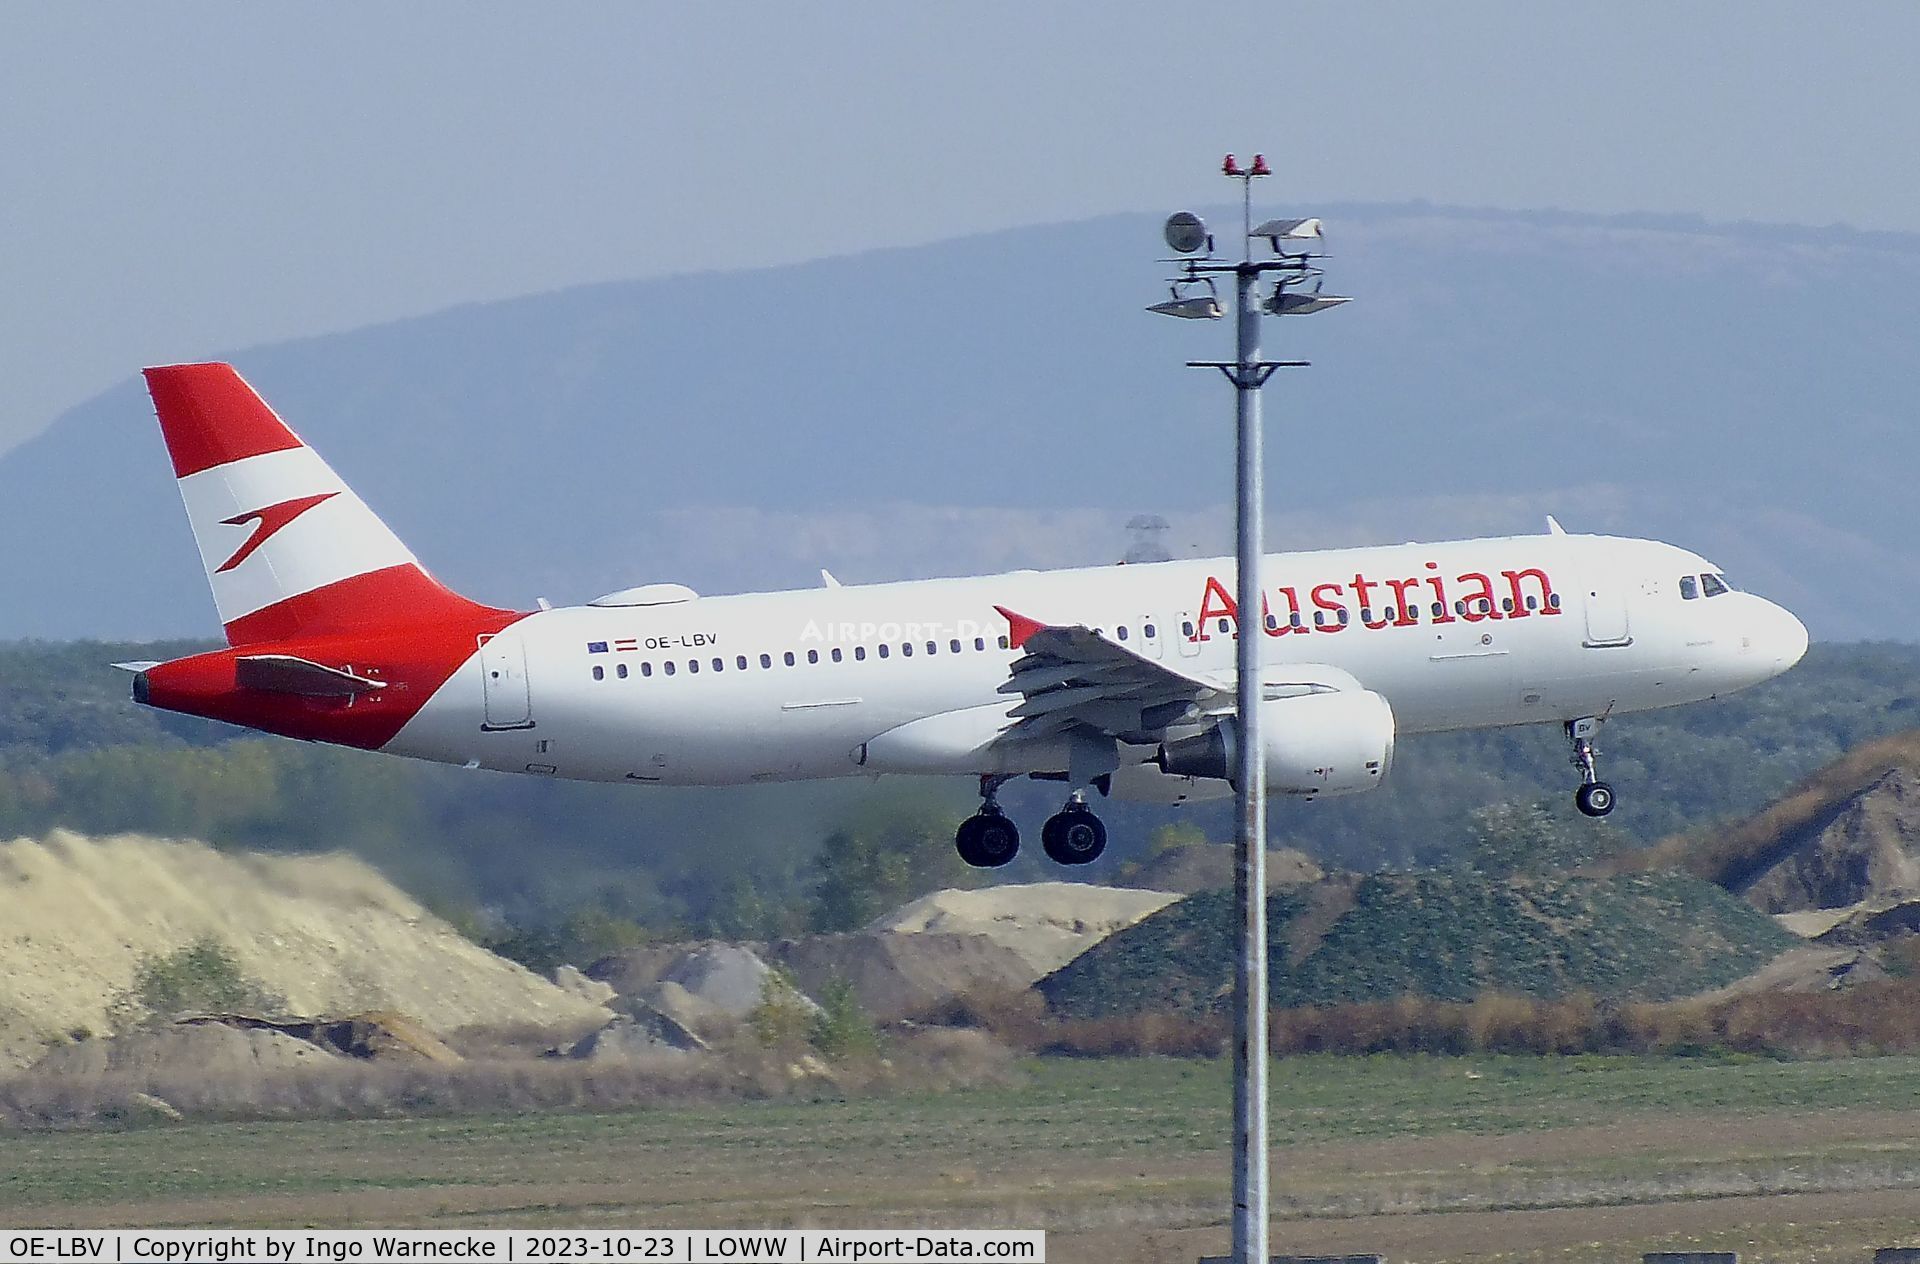 OE-LBV, 2000 Airbus A320-214 C/N 1385, Airbus A320-214 of Austrian Airlines at Wien-Schwechat airport